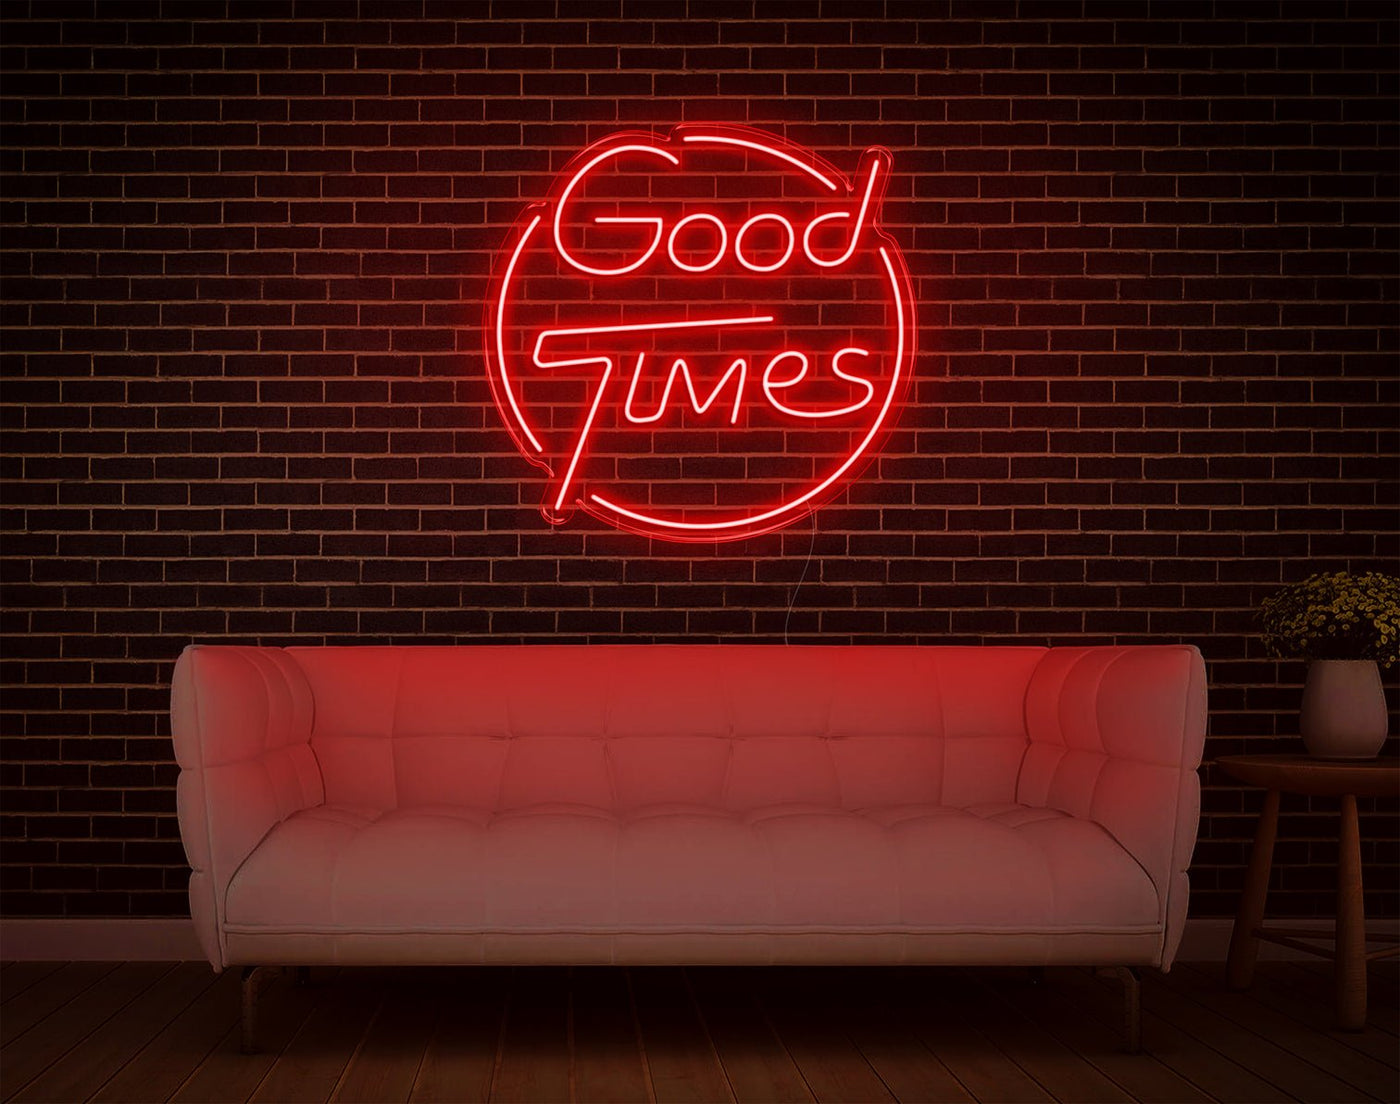 Good Times LED Neon Sign - 24inch x 25inchRed